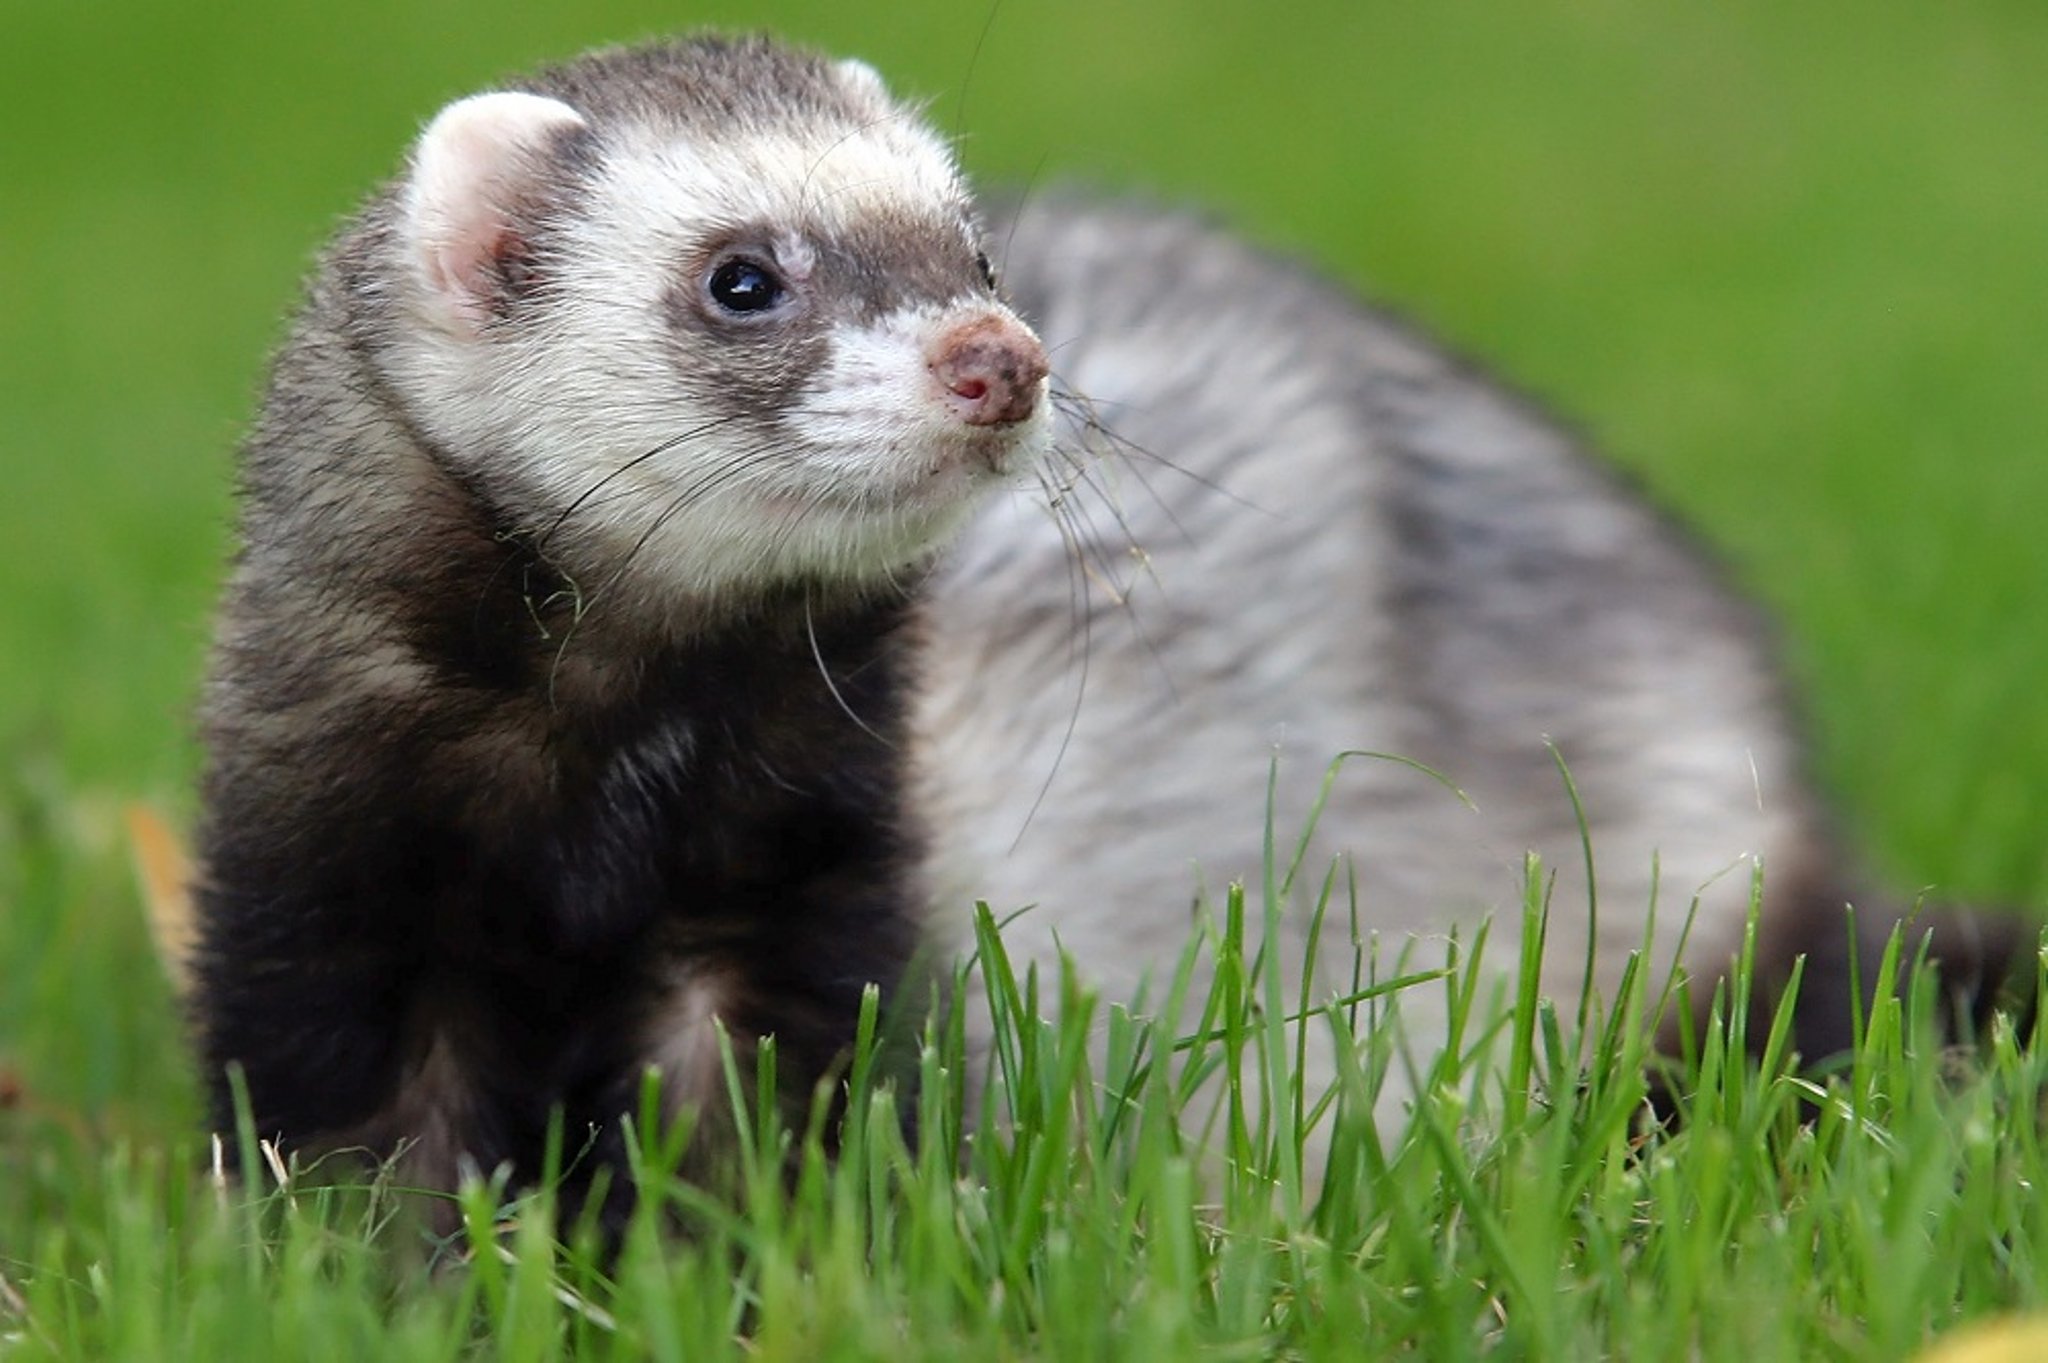 Physical appearance, ferret